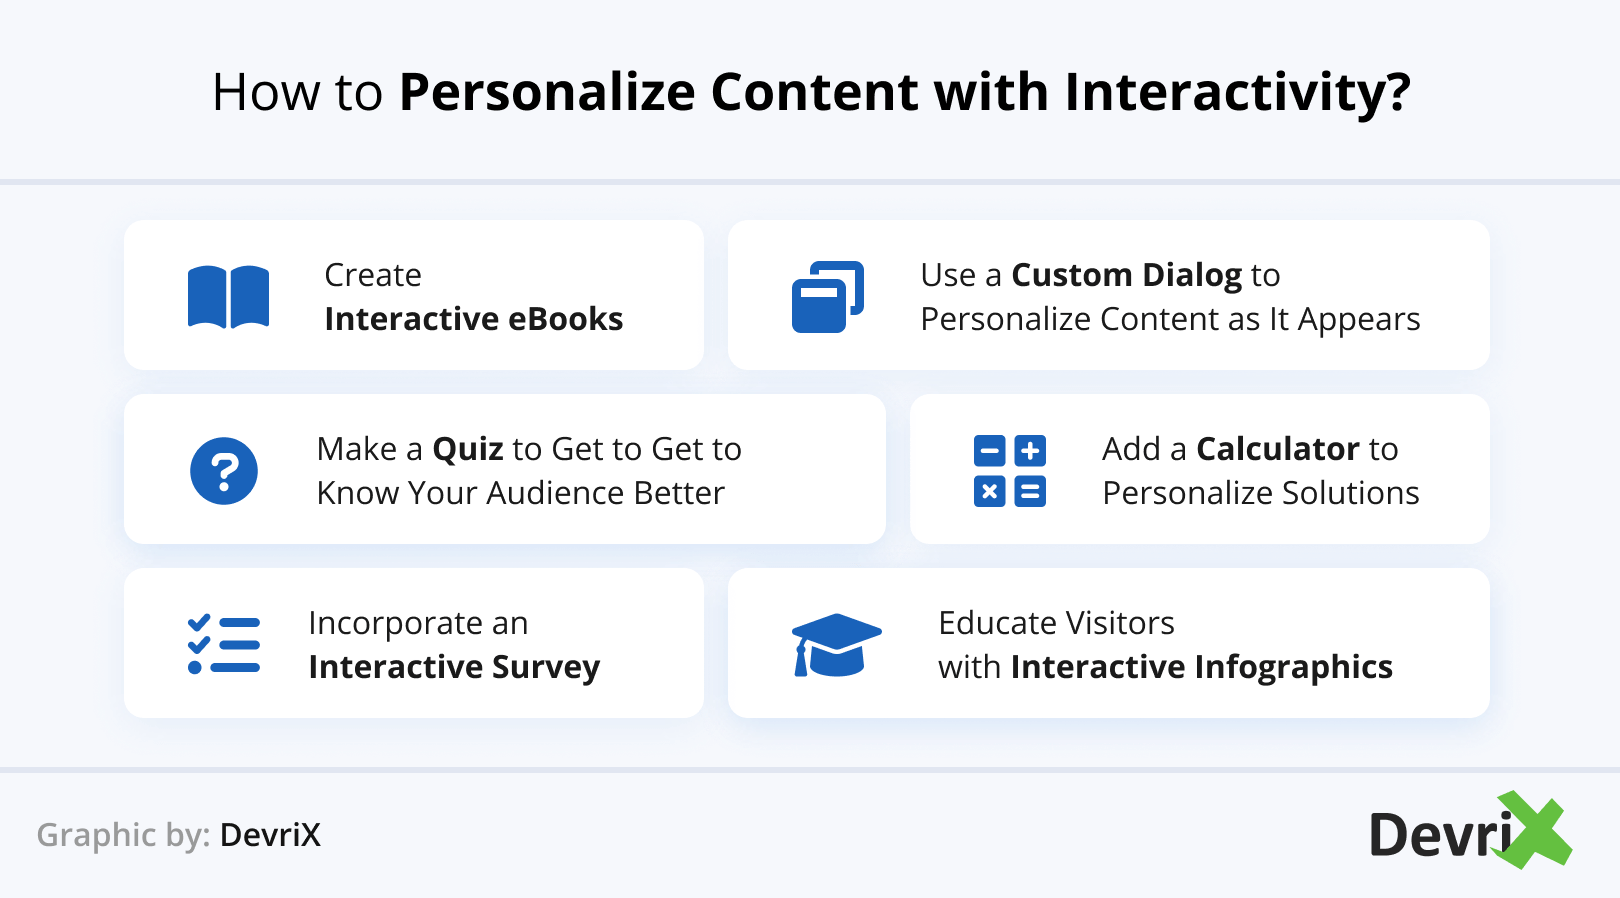 How to Personalize Content with Interactivity